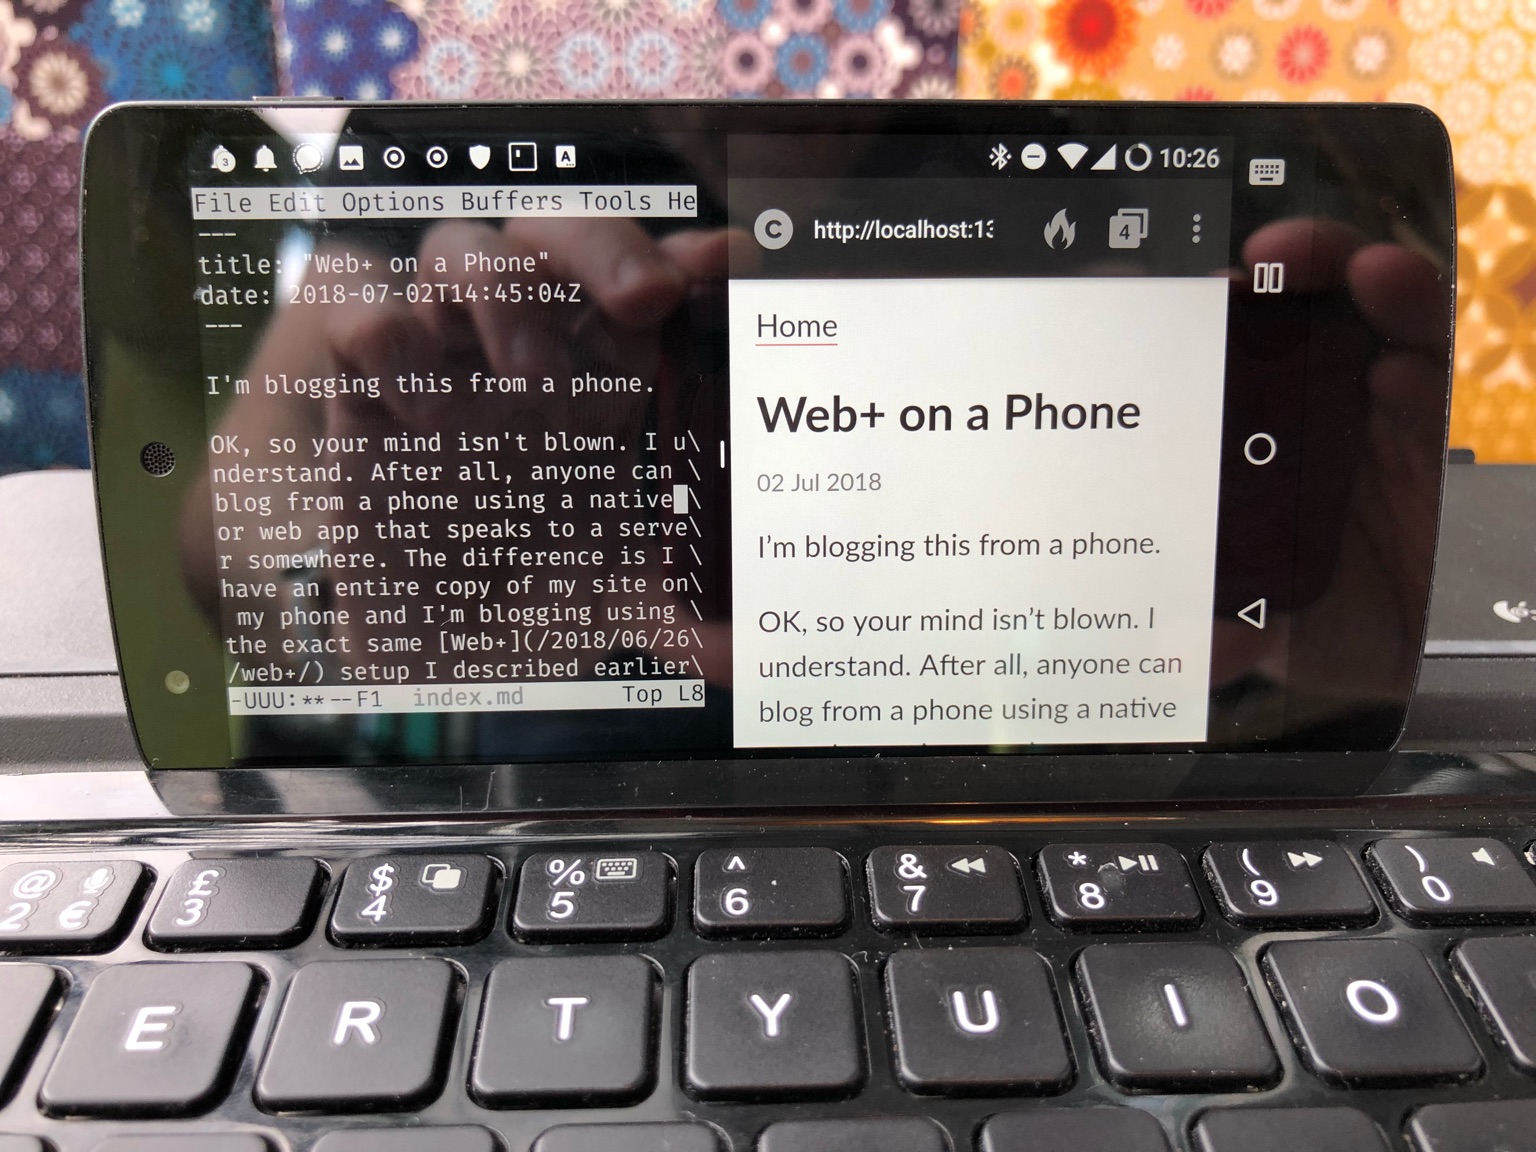 Photo of my Nexus 5 phone. The screen is split horizontally down the middle. On the left side is Emacs running with the text of this blog post showing in it. On the right side is the DuckDuckGo browser showing the rendered HTML from localhost:1313